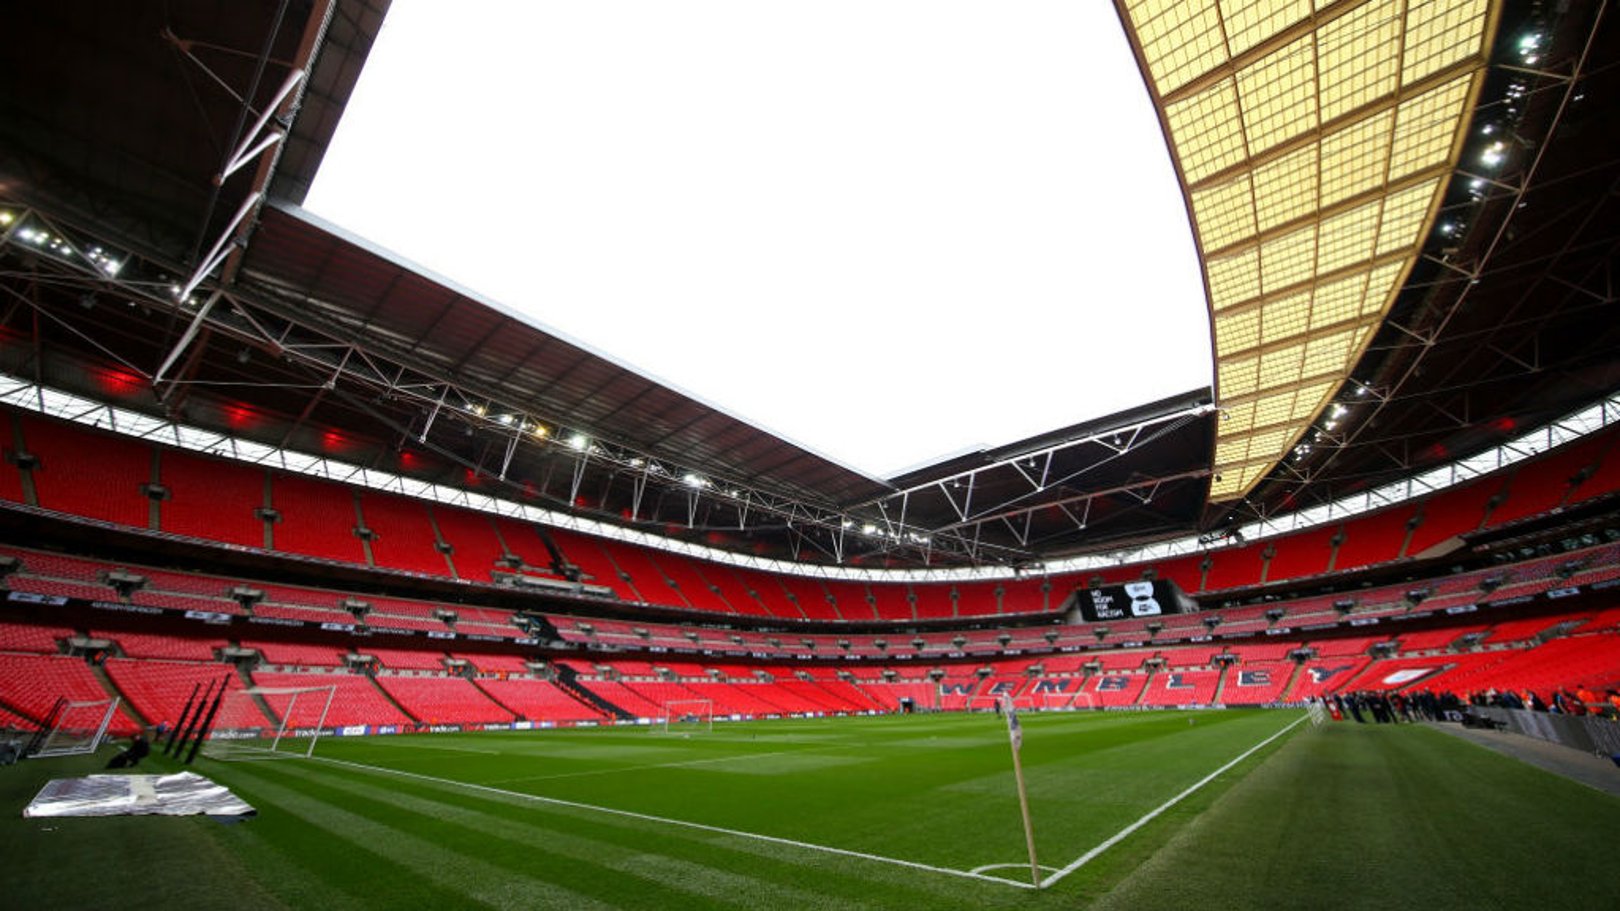 FA CUP FINAL: The City have squad have paid for 26 coaches to take fans to Wembley